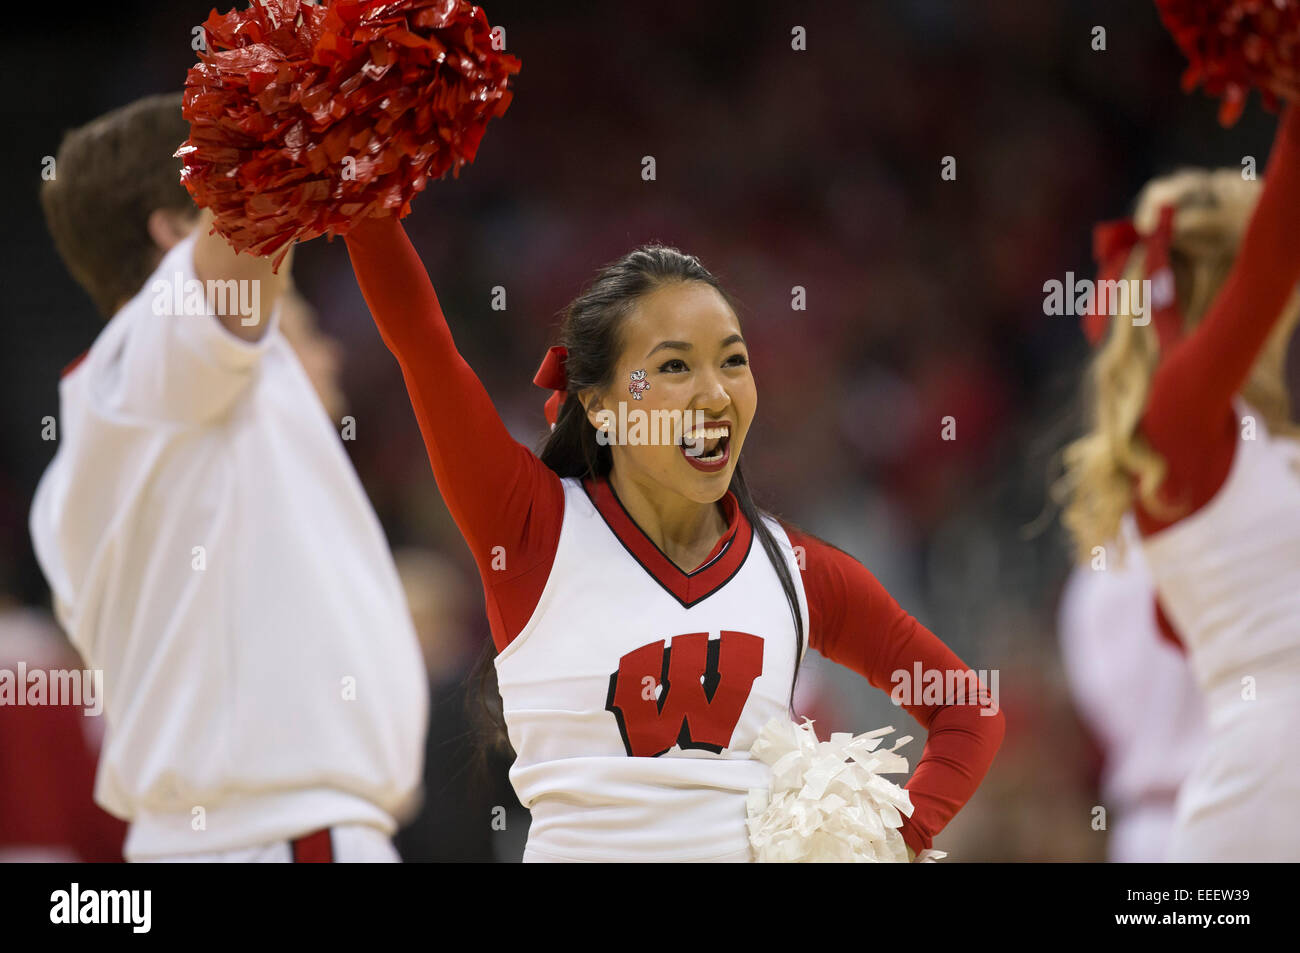 January 15 2015 Wisconsin Cheerleader Entertains Crowd During The Ncaa Basketball Game Between 